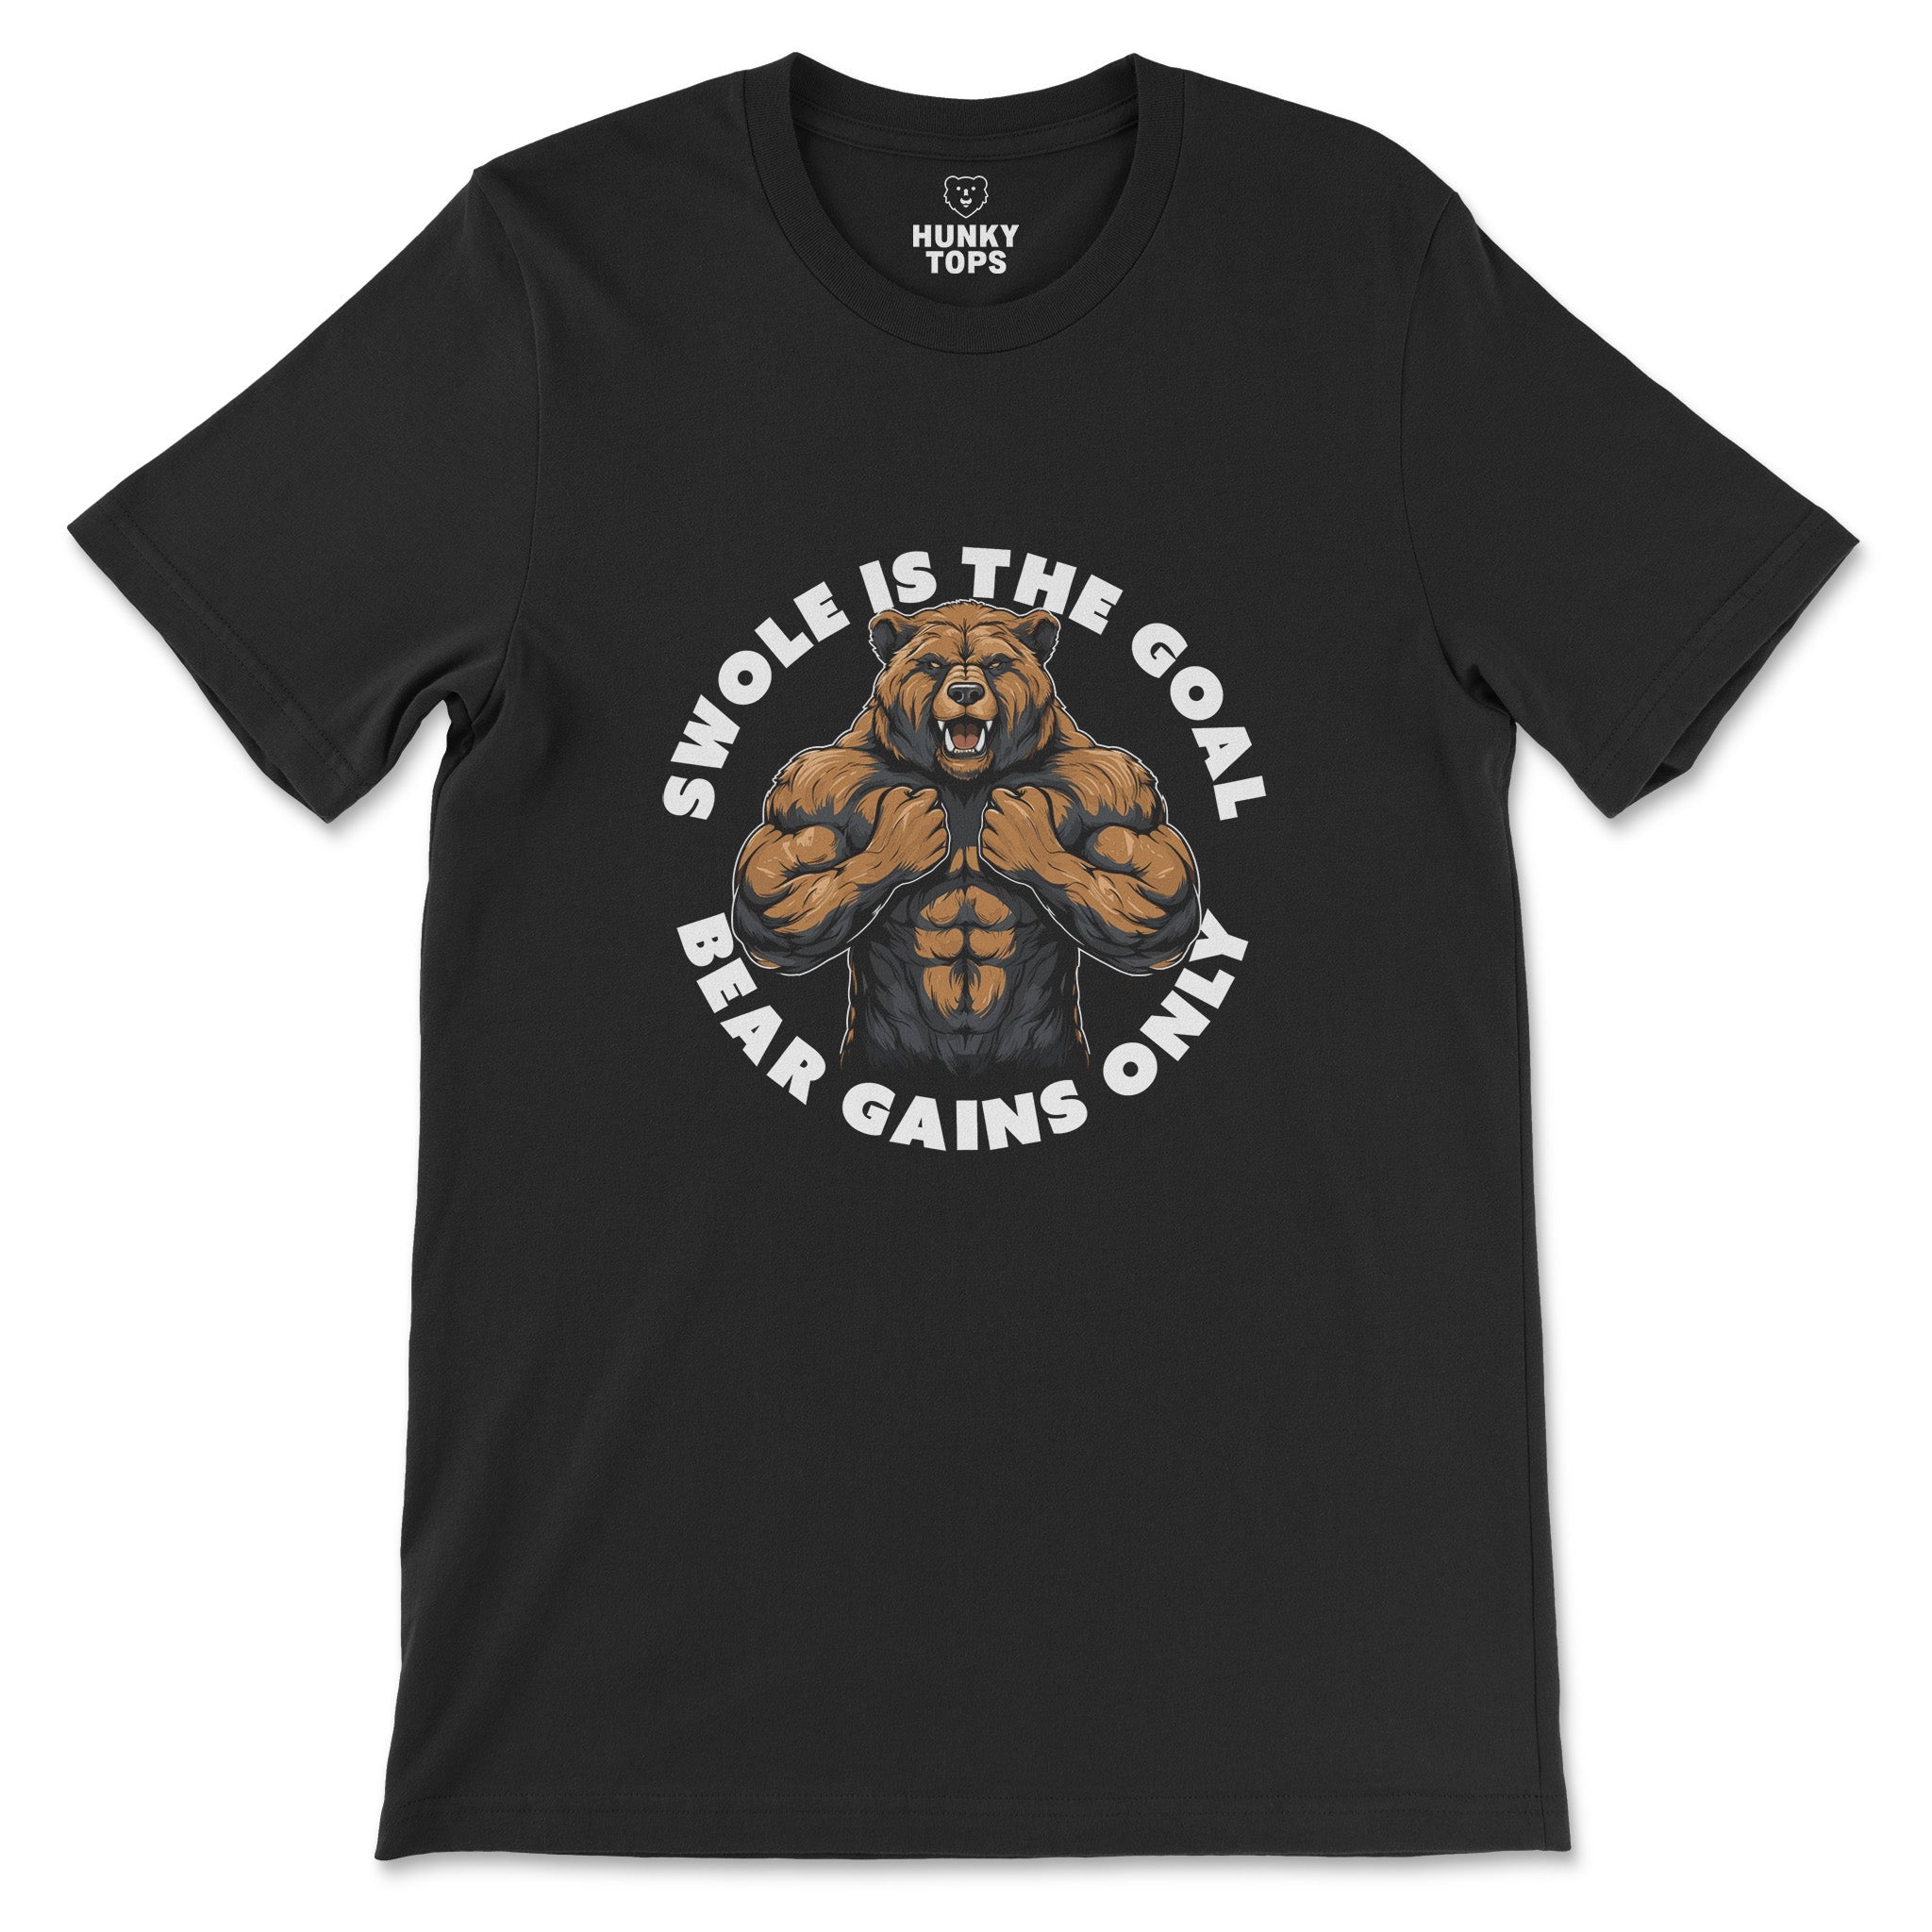 "Swole is the Goal, Bear Gains Only" T-Shirt - Hunky Tops